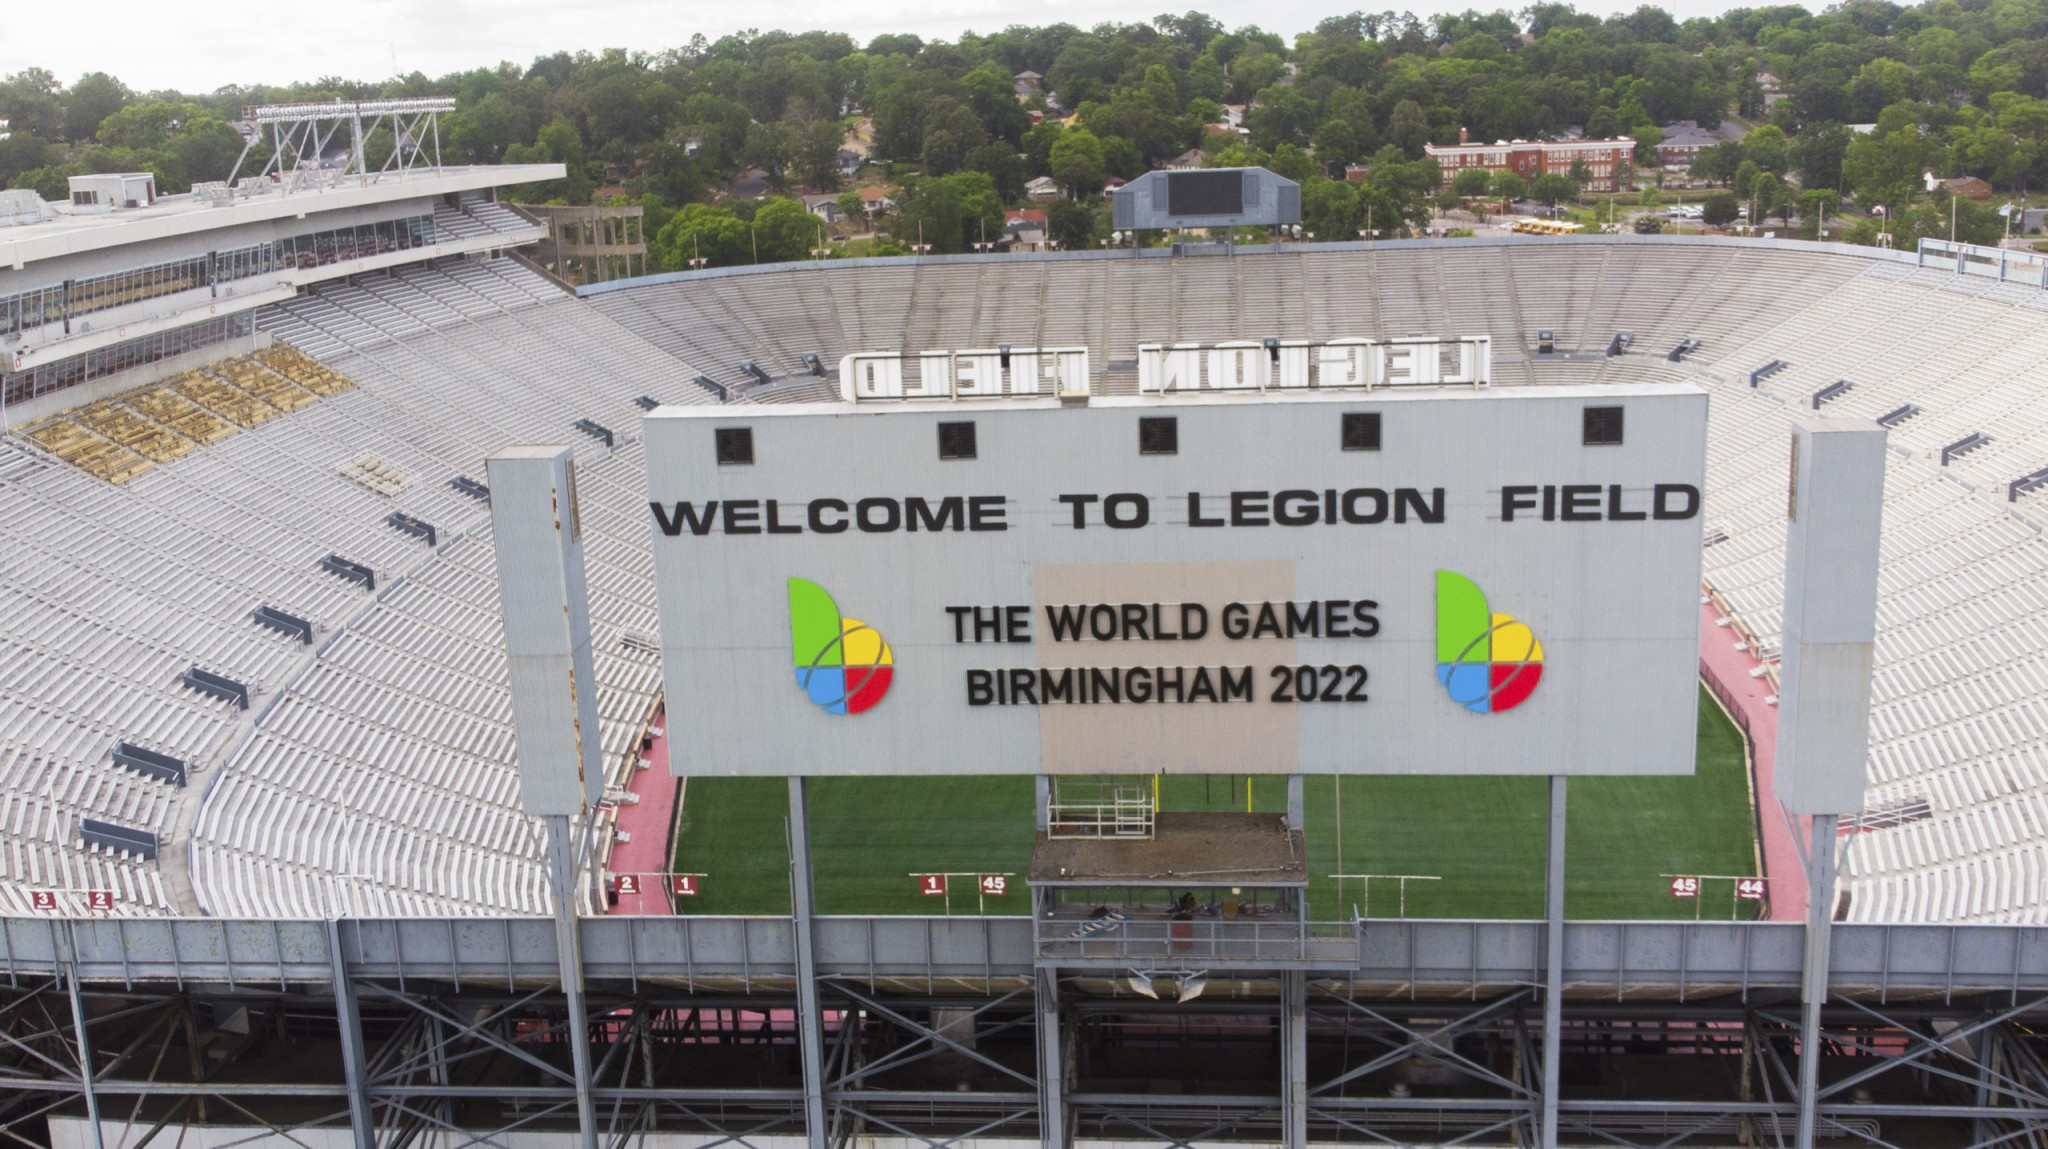 Organisers of the 2022 World Games in Birmingham in Alabama hope to have full venues next July ©The World Games 2022